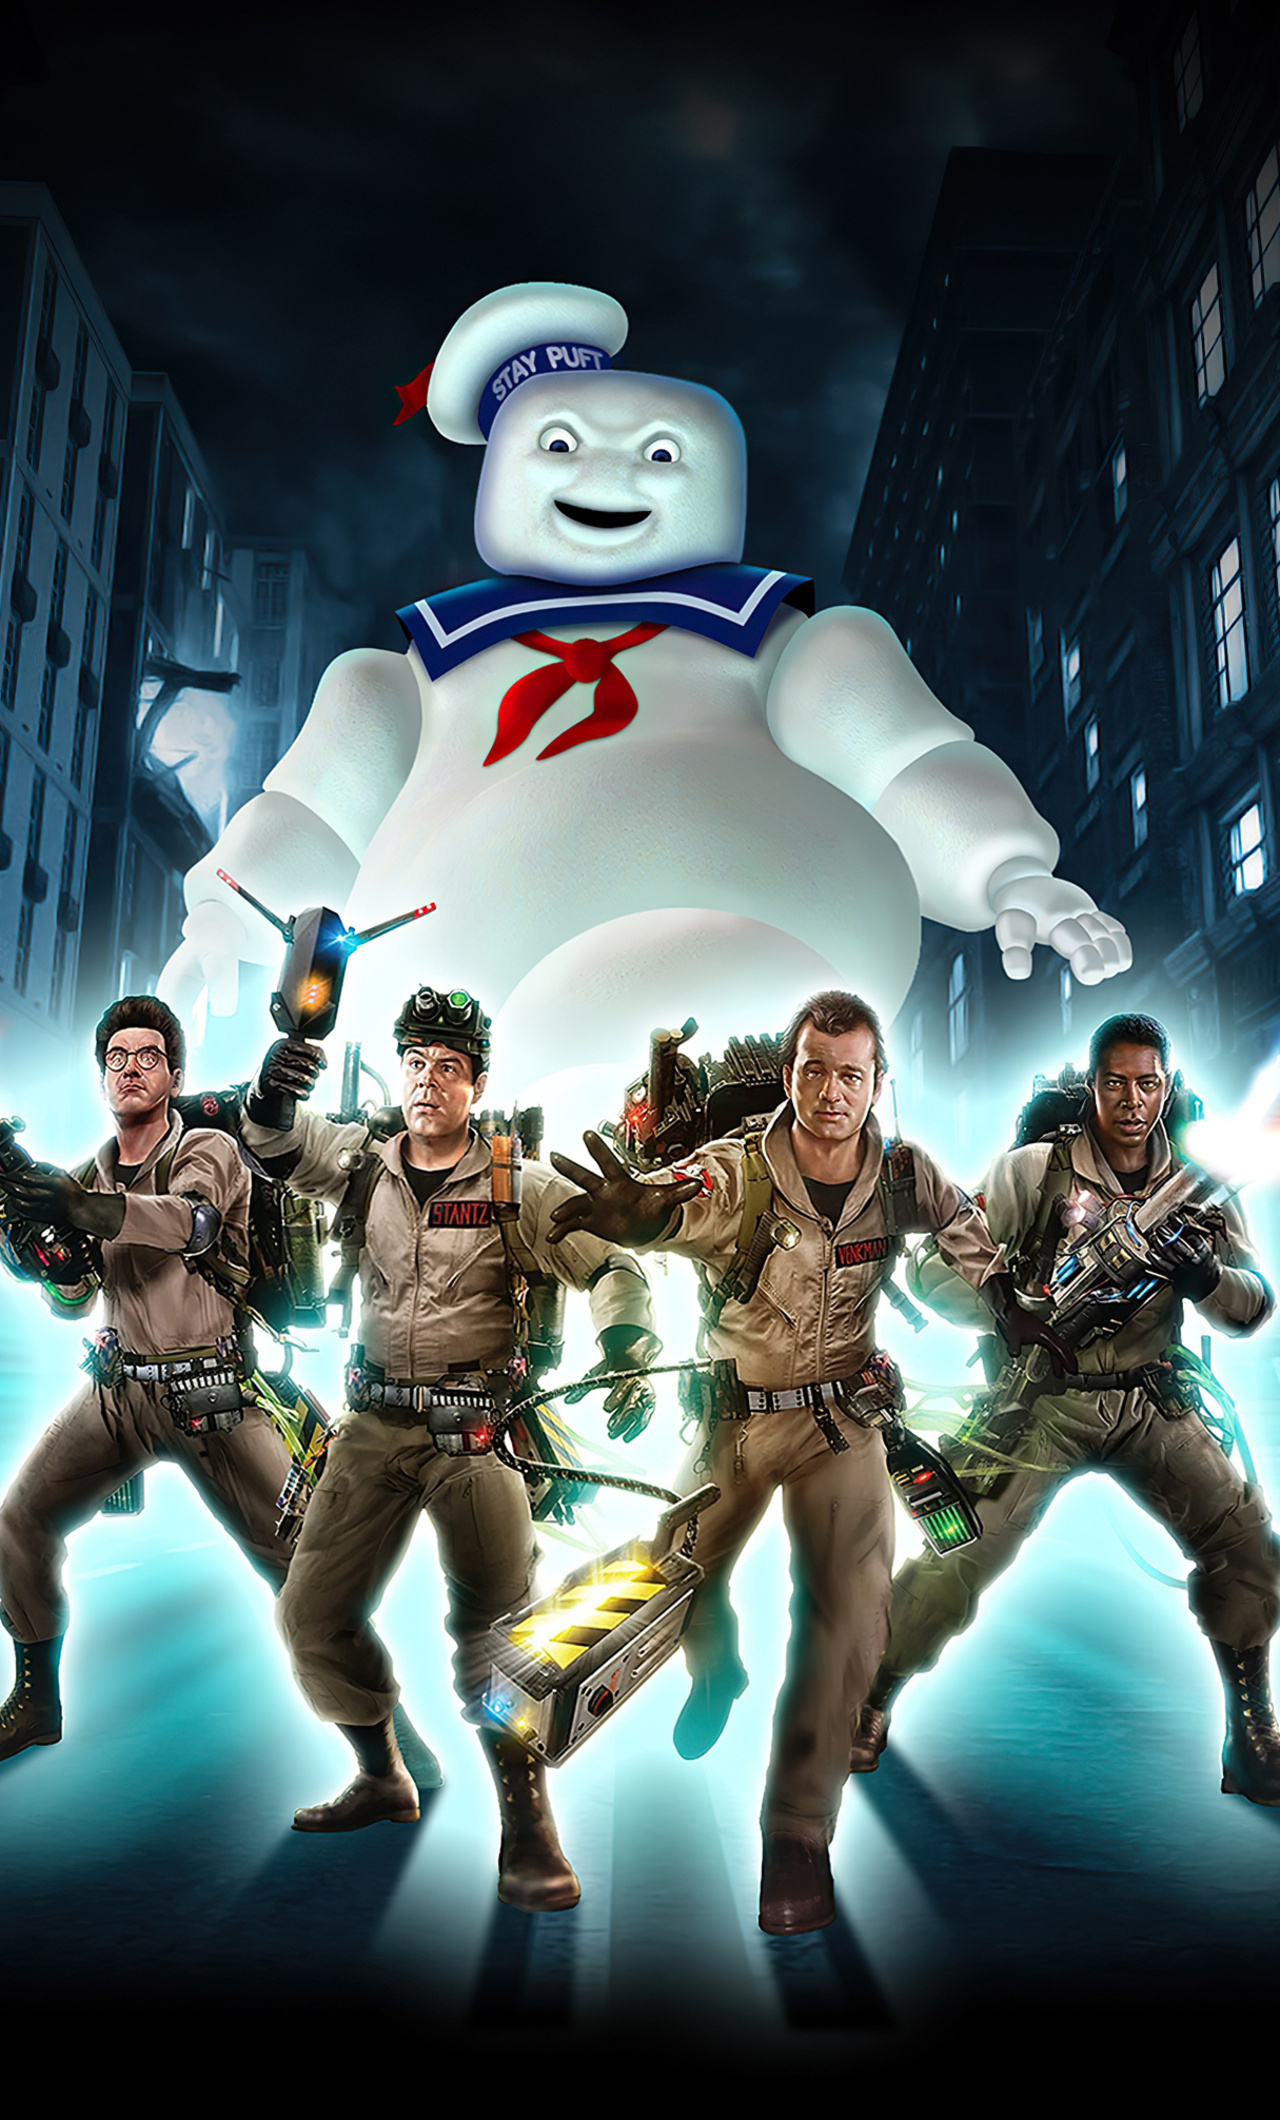 Ghostbusters: Ghostbusters: The Video Game Remastered. 1280x2120 HD Background.